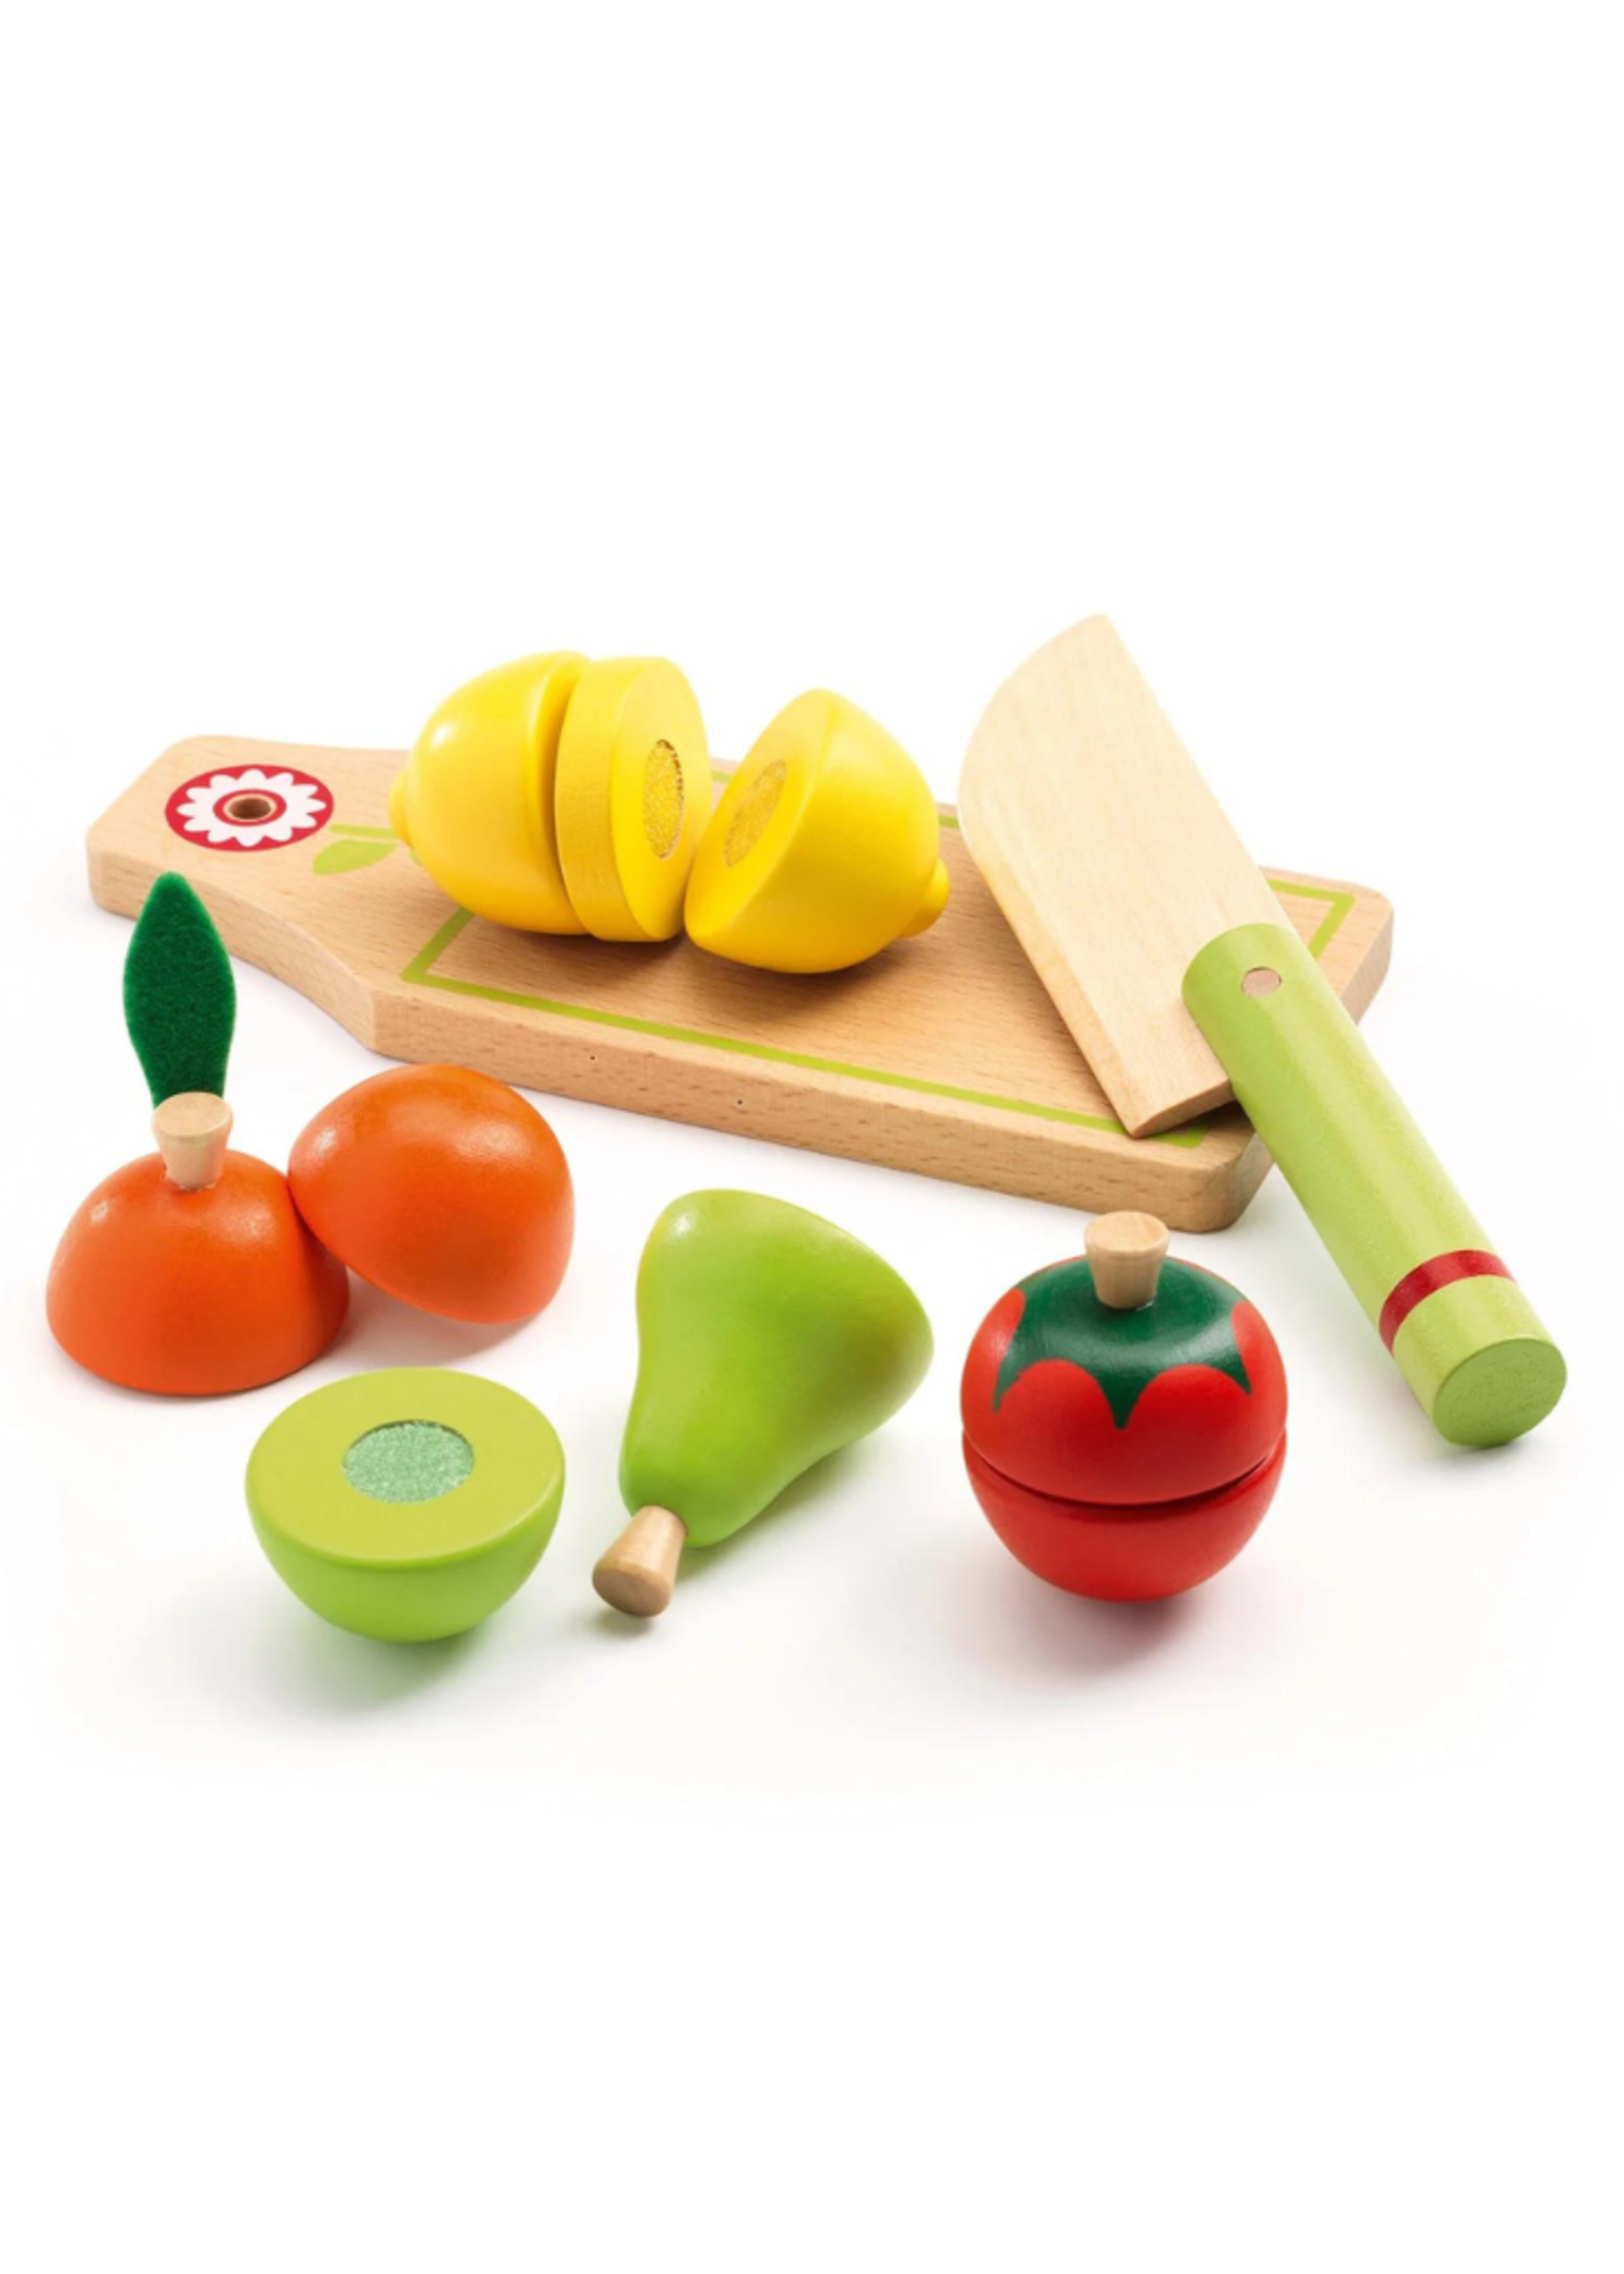 Djeco Cutting Fruits and Vegetables Set